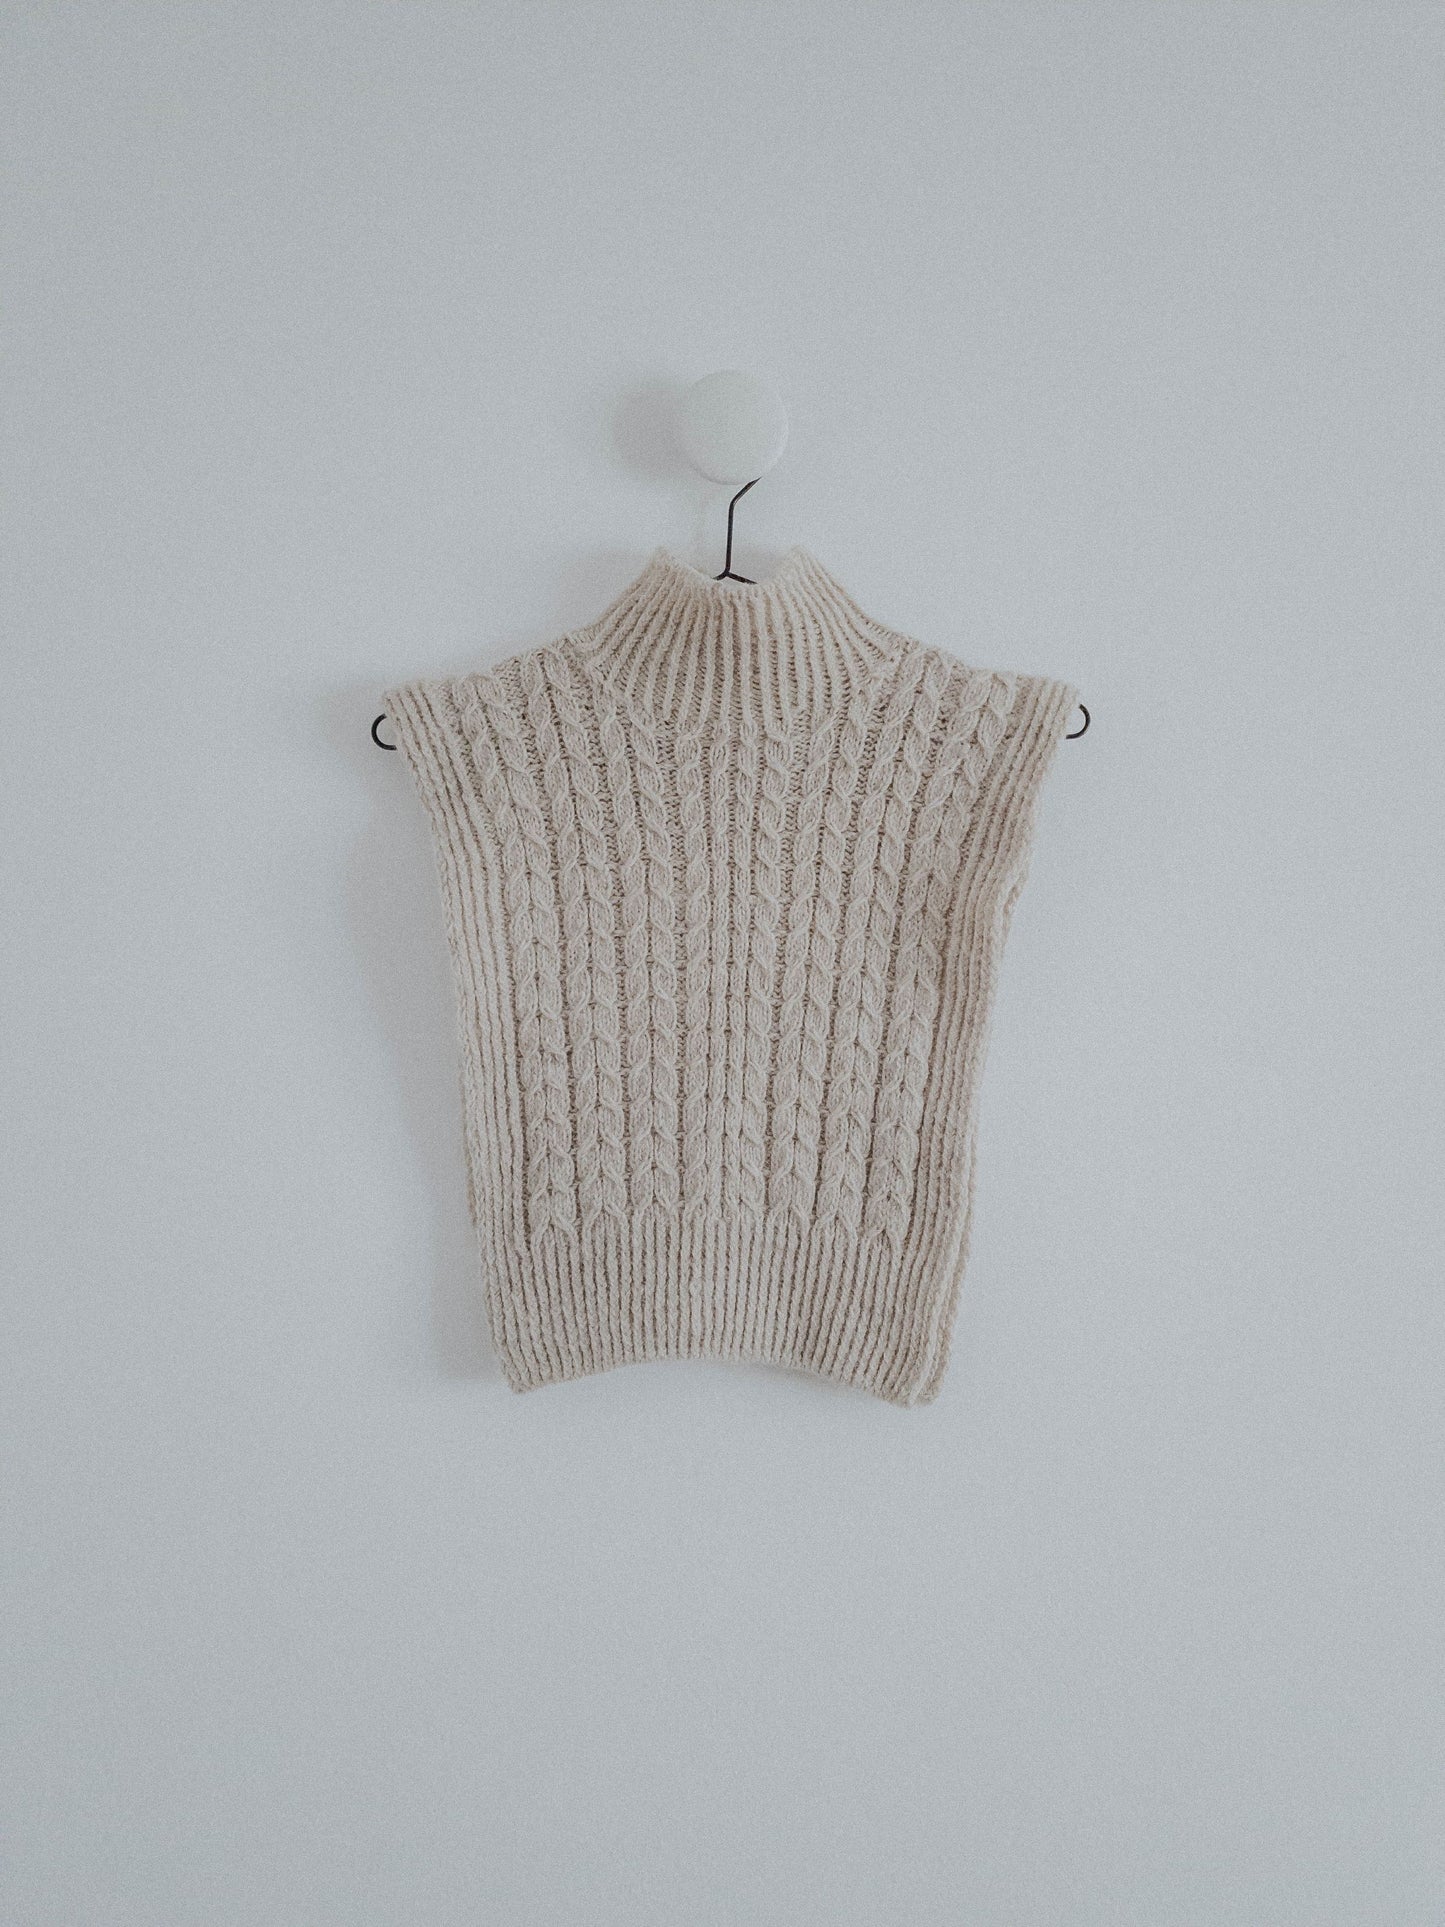 Year 3 - Knitting Pattern Collection